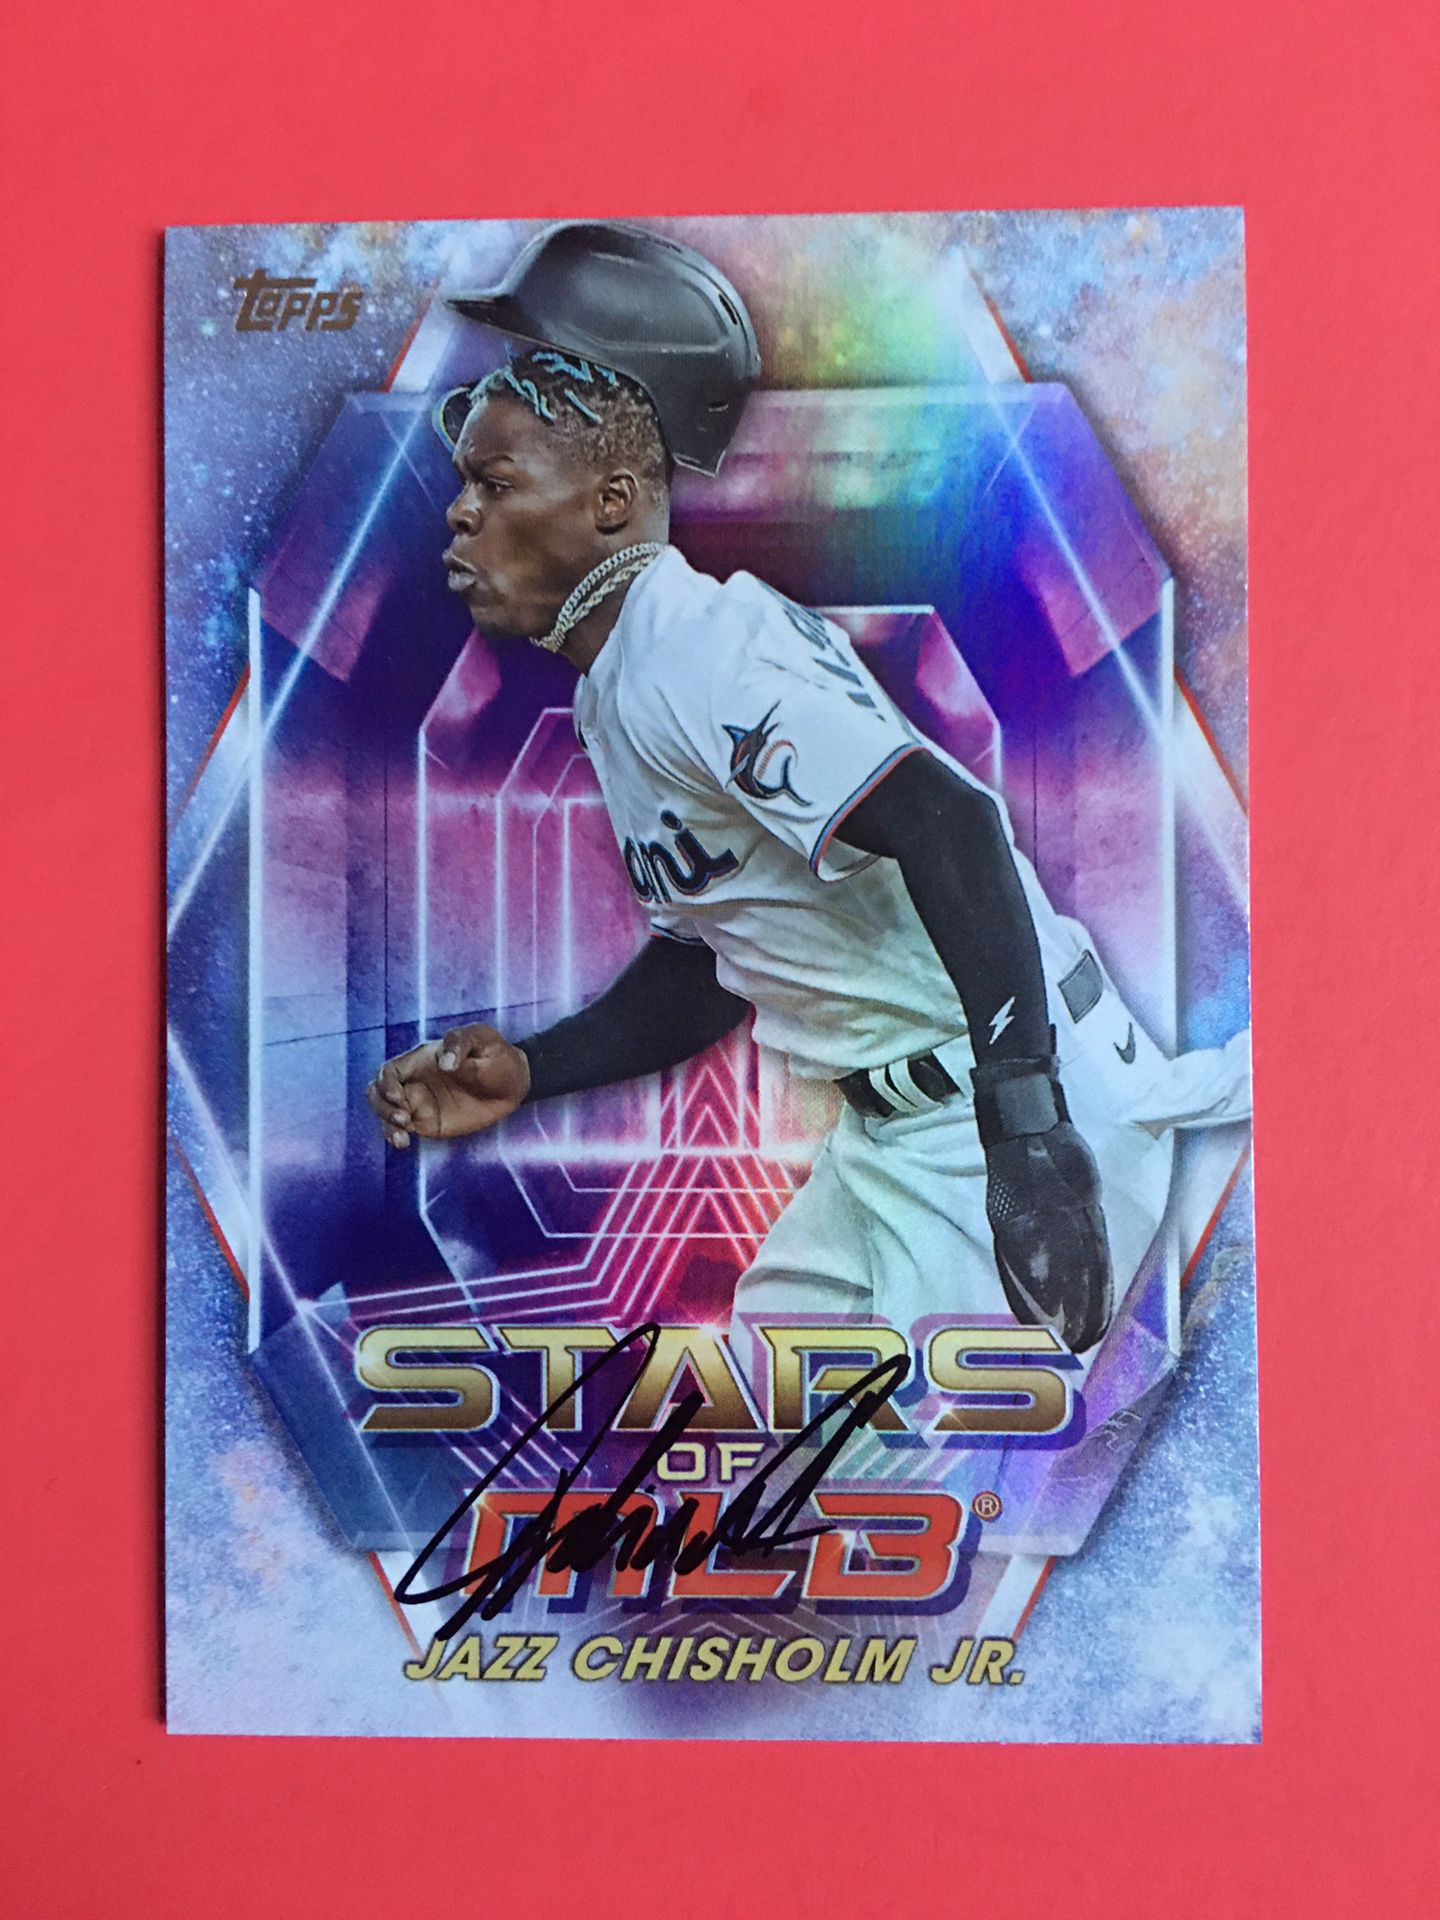 Autograph Card Signed By Marlins Star Jazz Chisholms Jr.